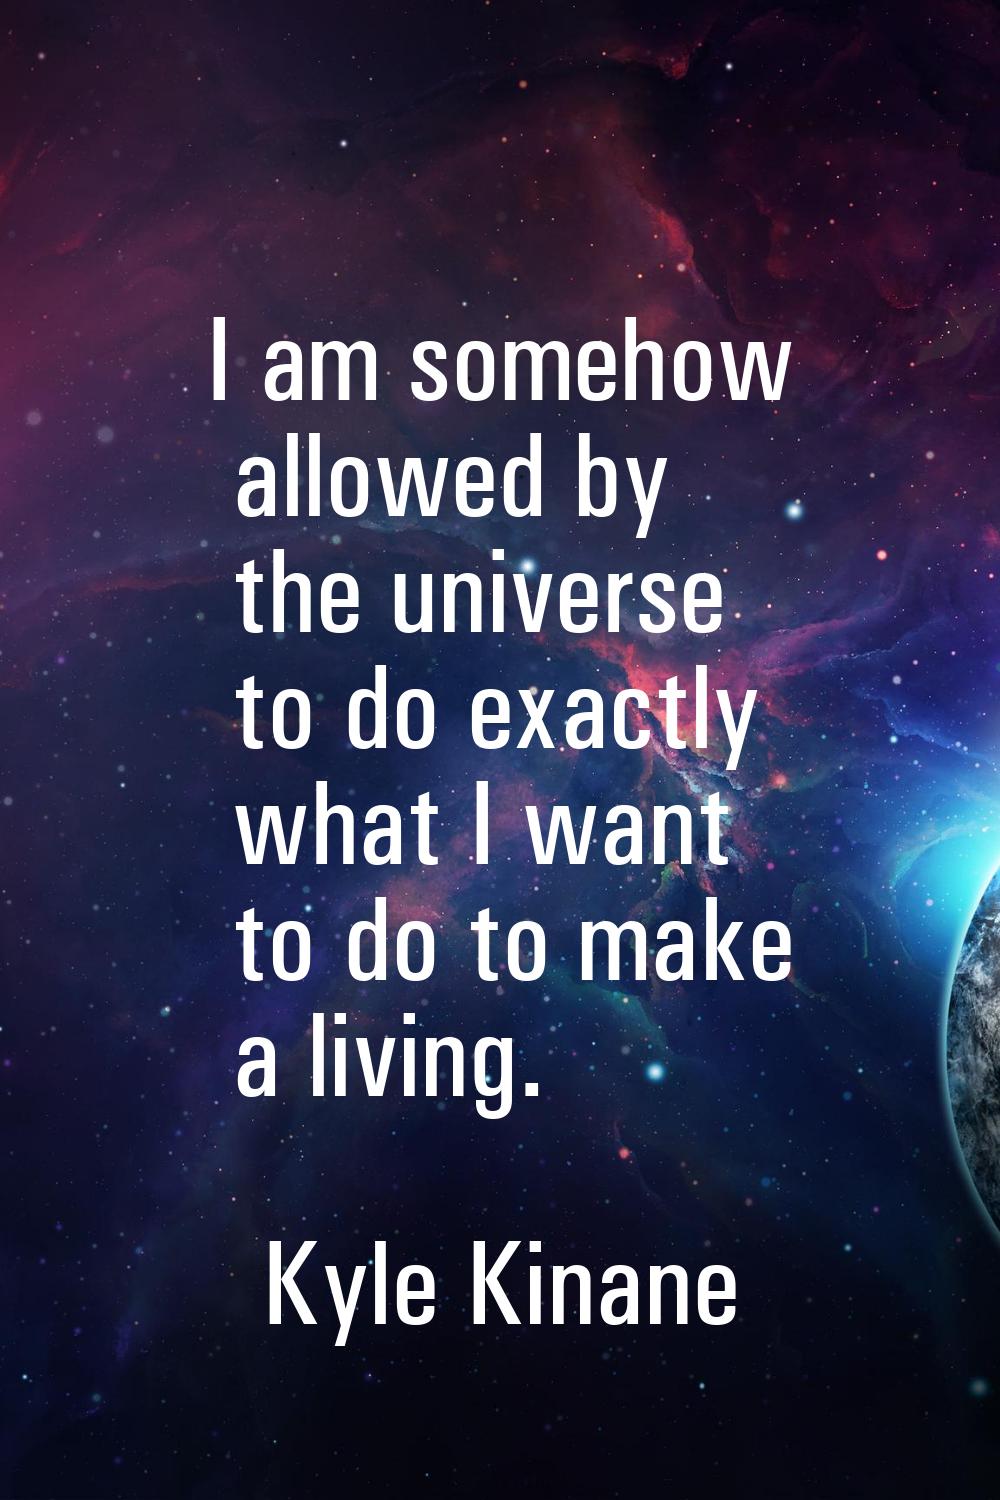 I am somehow allowed by the universe to do exactly what I want to do to make a living.